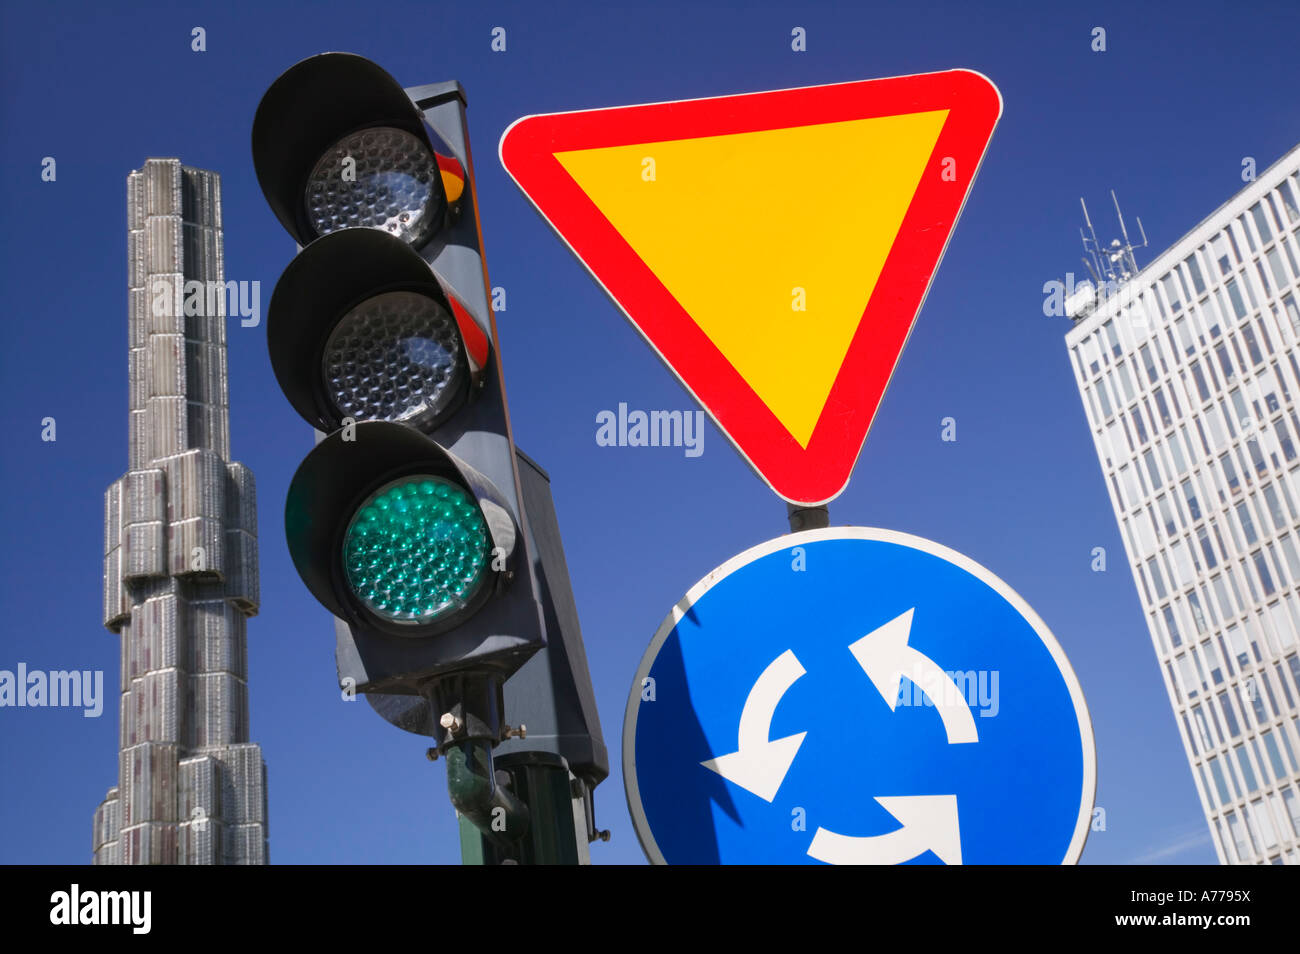 Traffic signal and signs in Sergels Torg, Sweden. Stock Photo